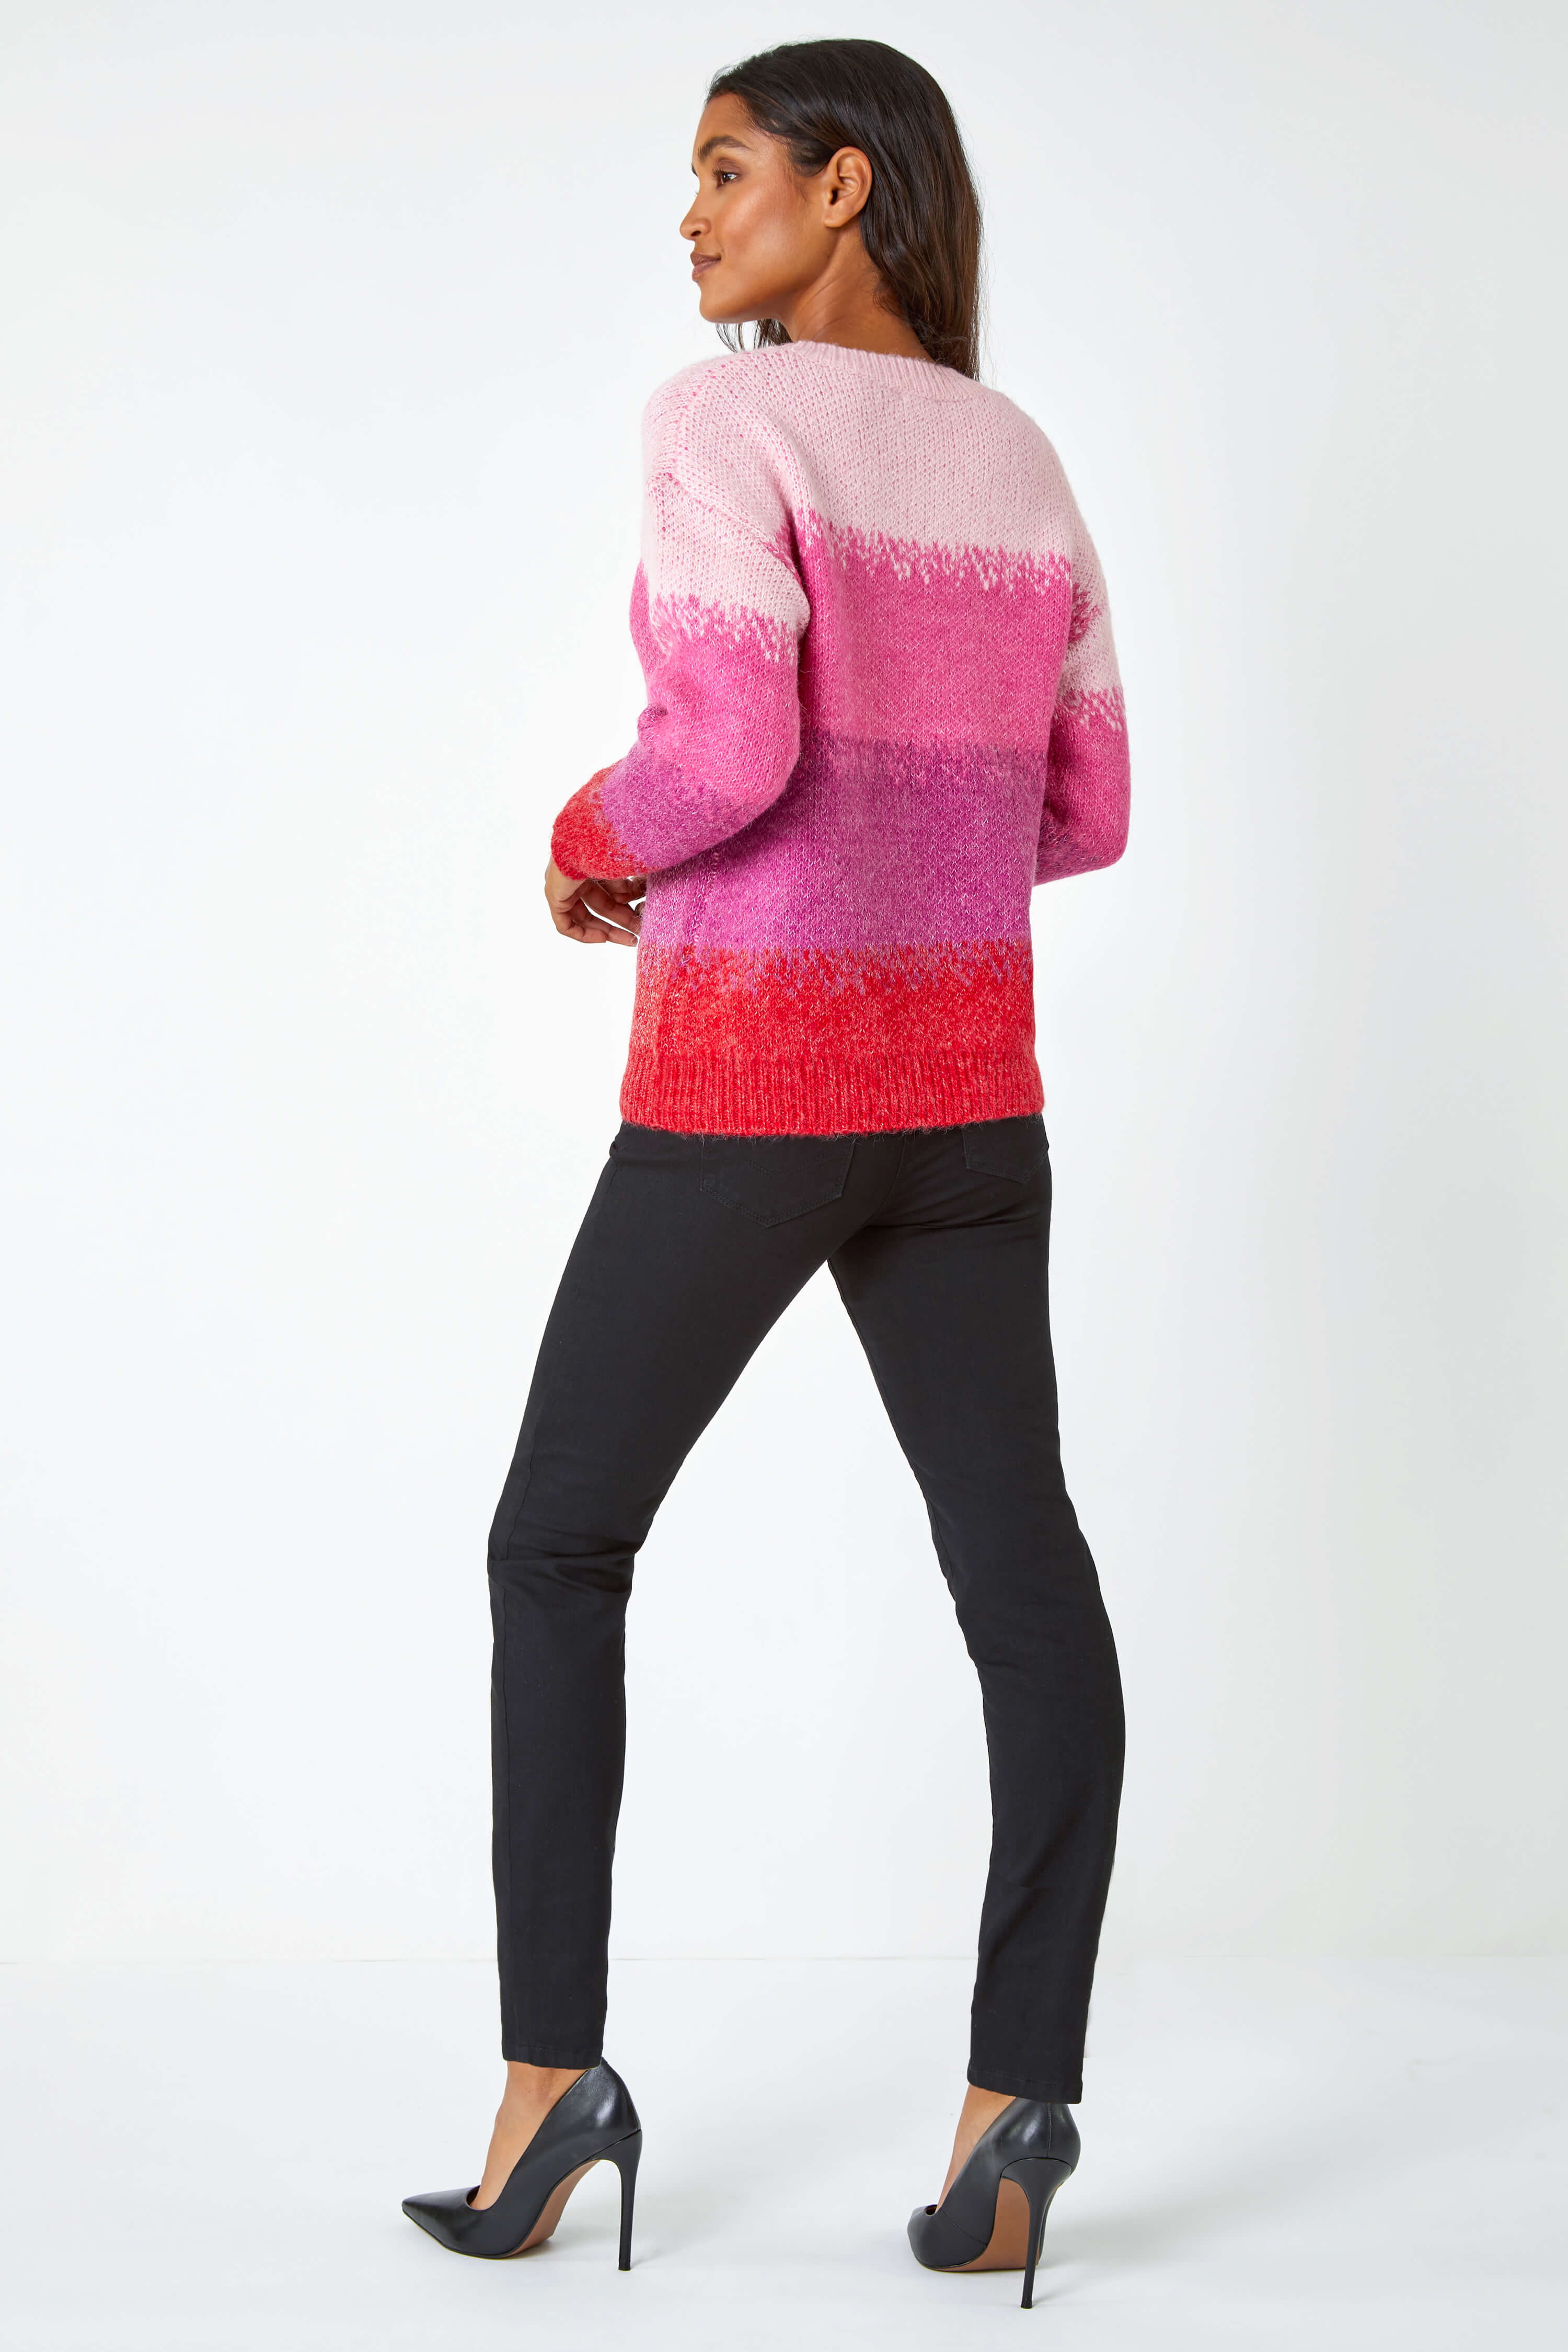 PINK Stripe Print Knitted Jumper, Image 3 of 5